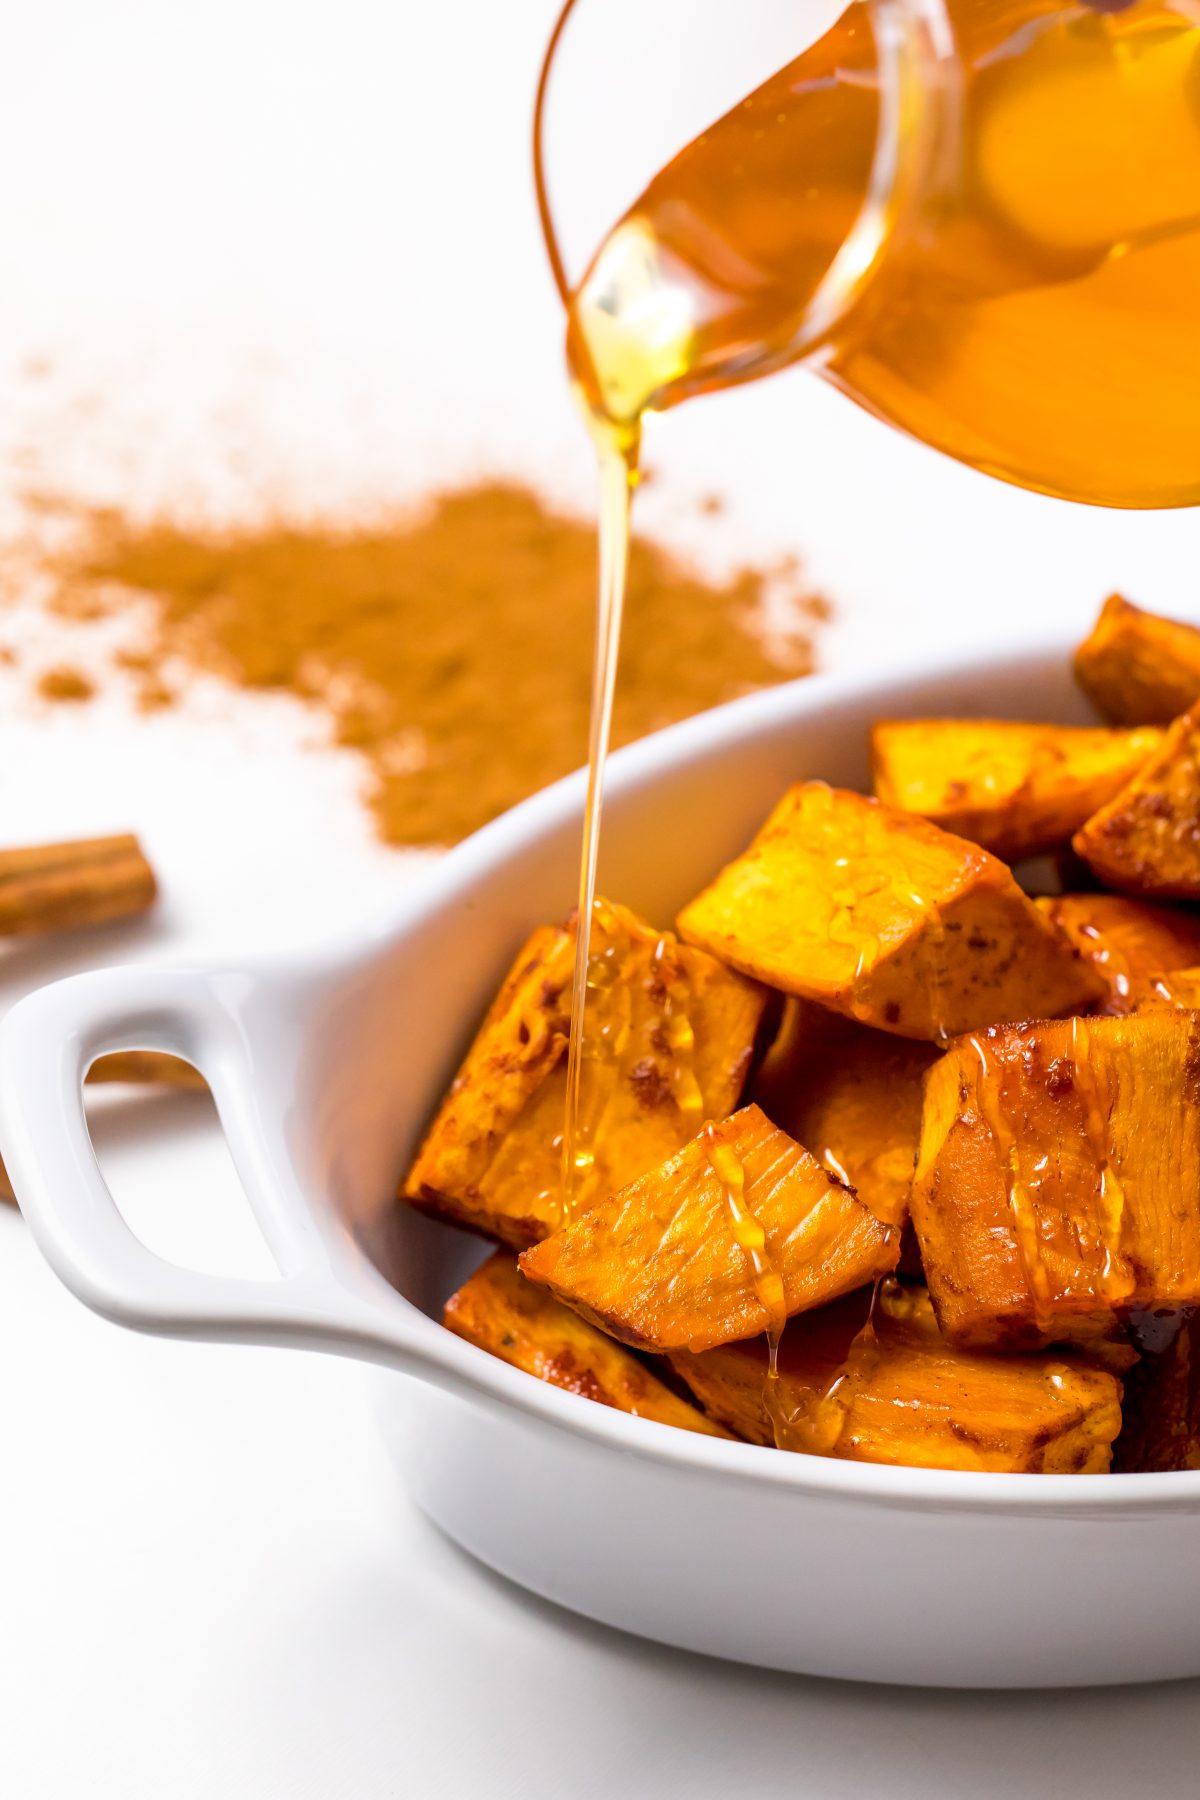 Honey cinnamon roasted sweet potatoes - Serve the sweet potatoes drizzled with honey